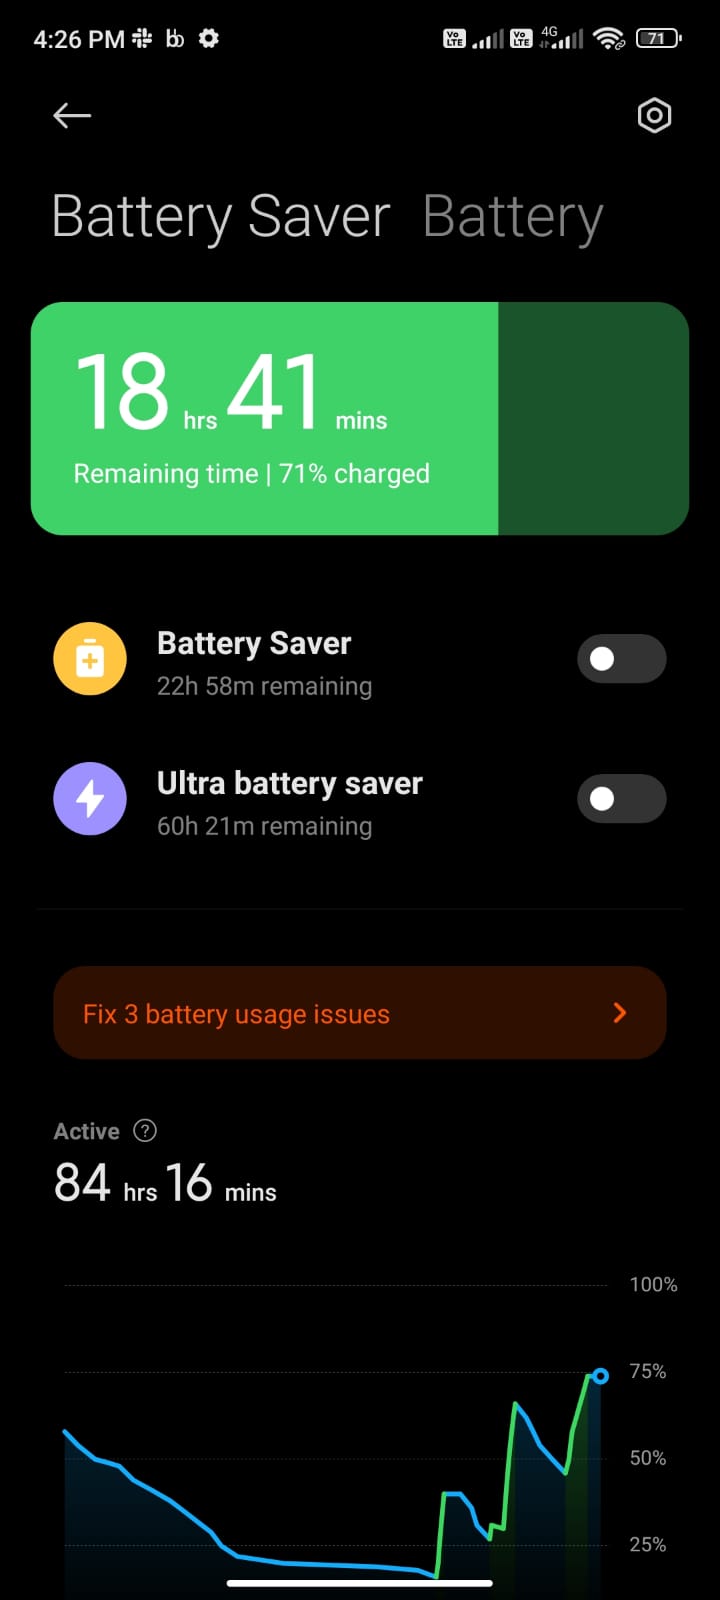 Battery usage and Battery Saver details